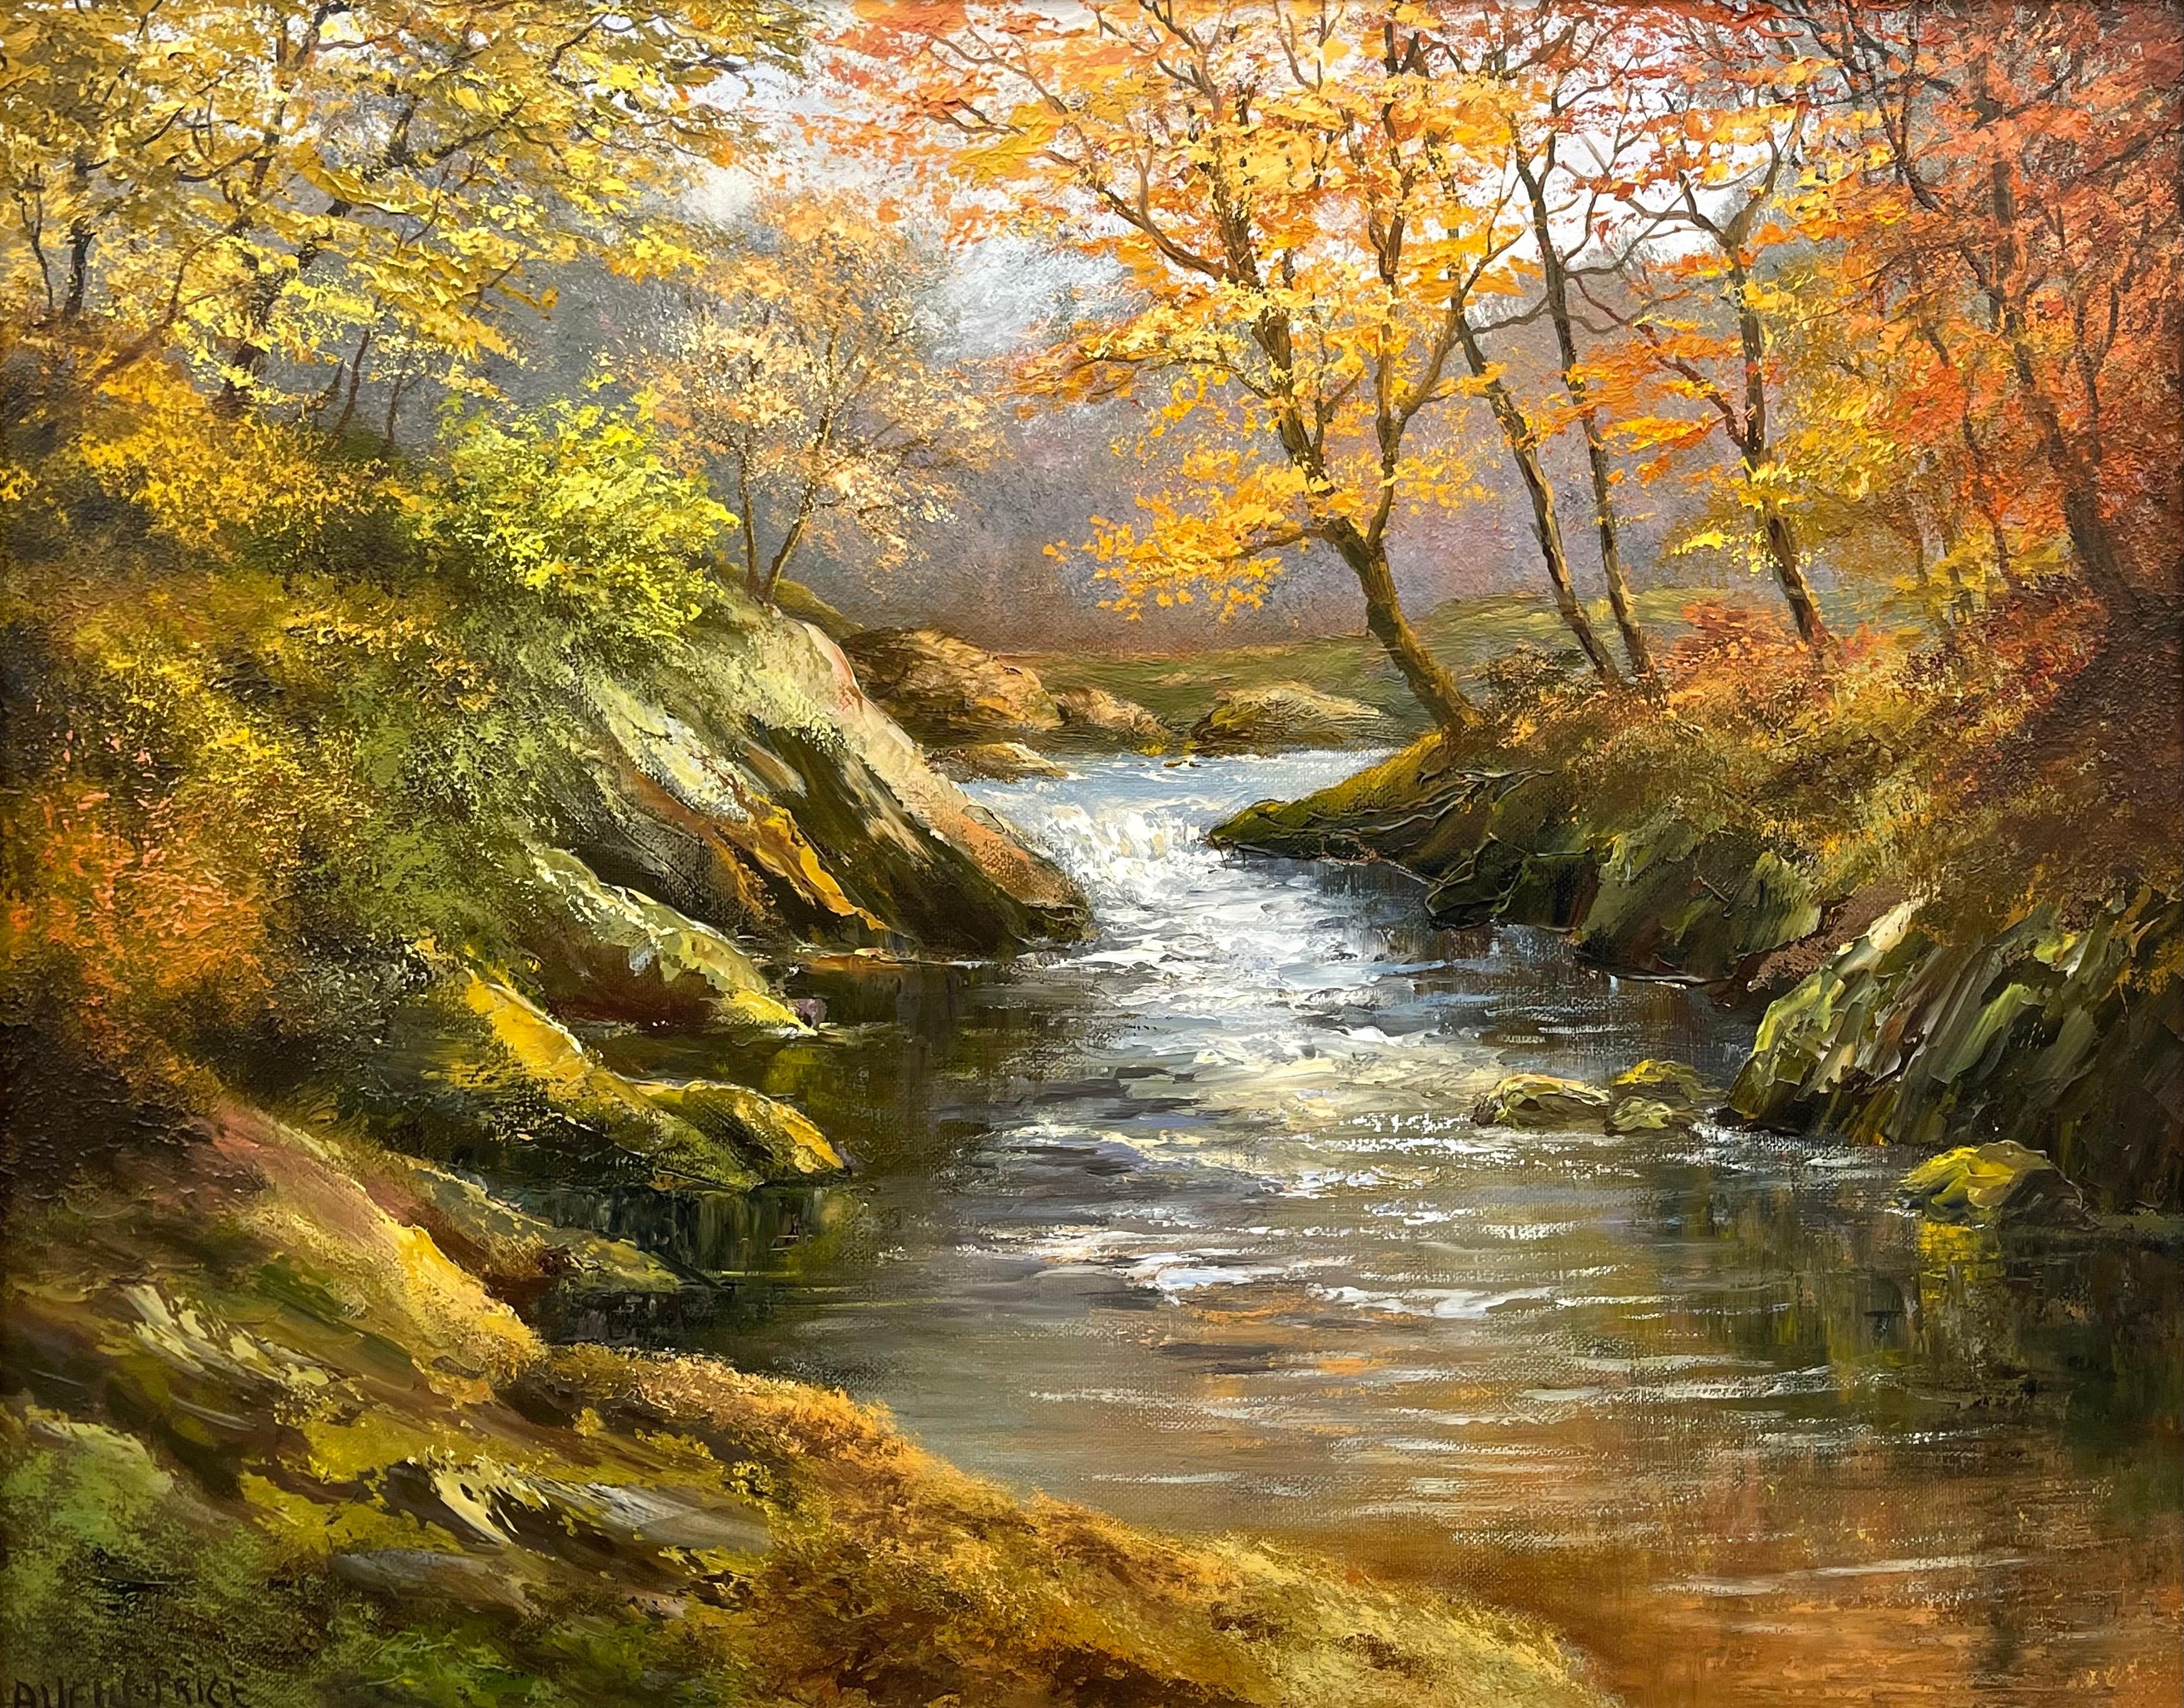 Oil Painting of Beautiful River Landscape Scene in Autumn Sun by British Artist 3